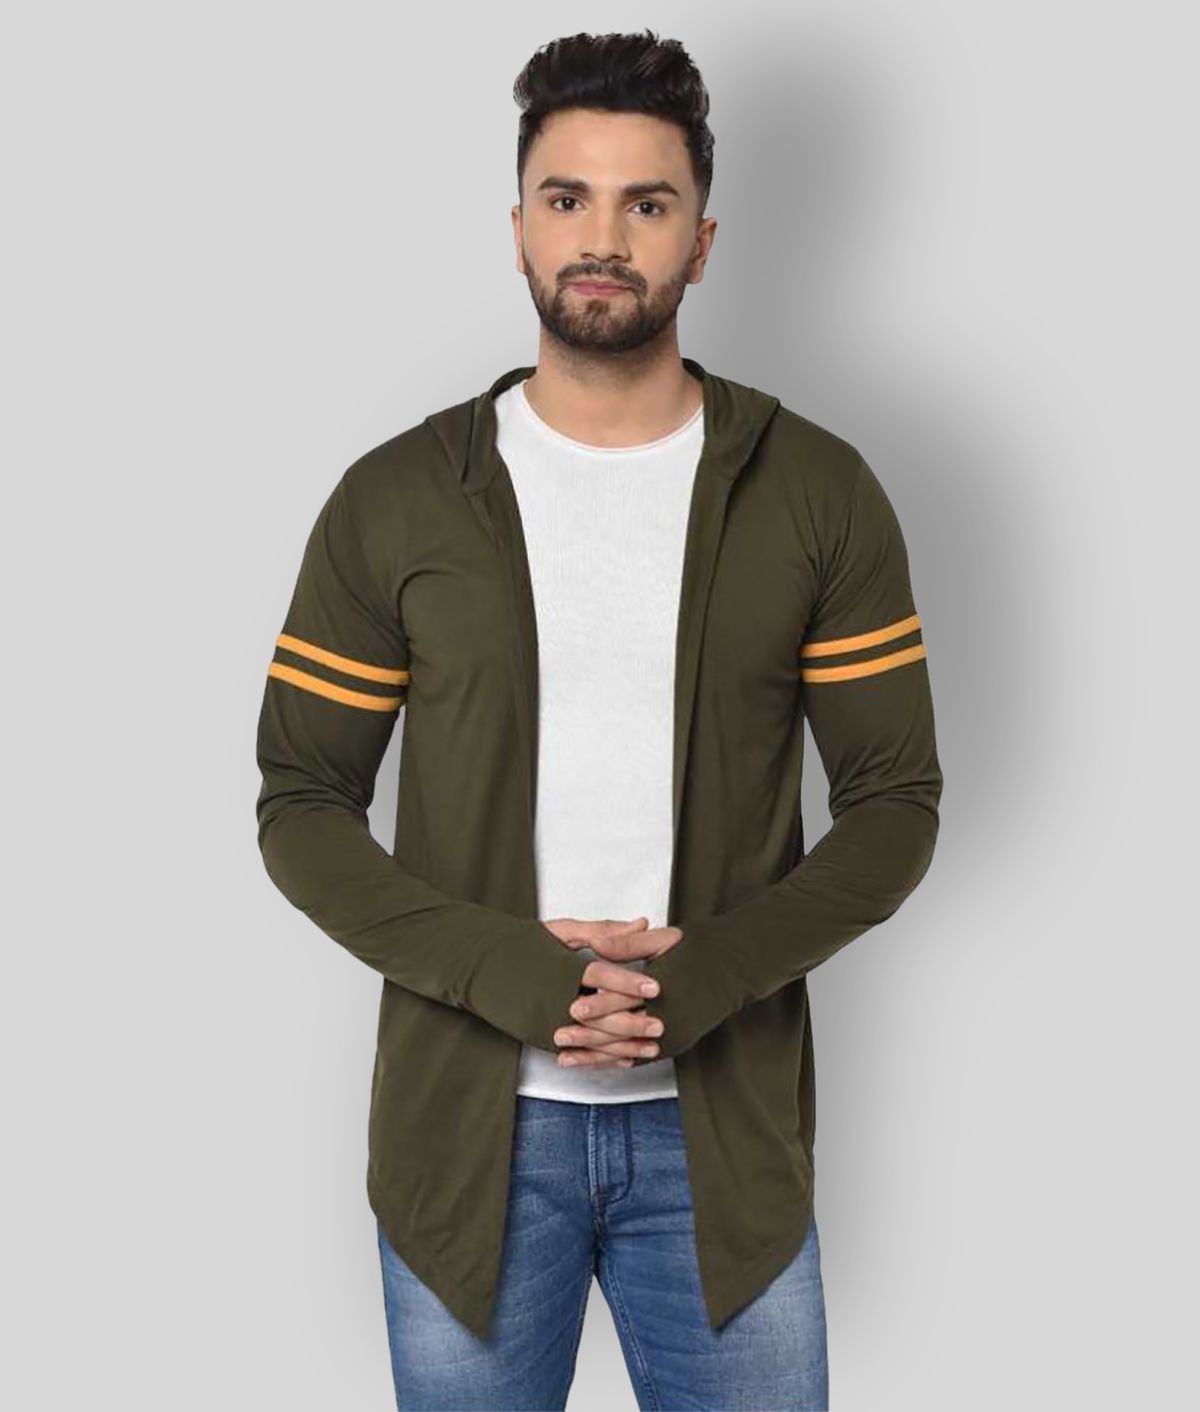     			Glito - Green Cotton Men's Cardigans Sweater ( Pack of 1 )